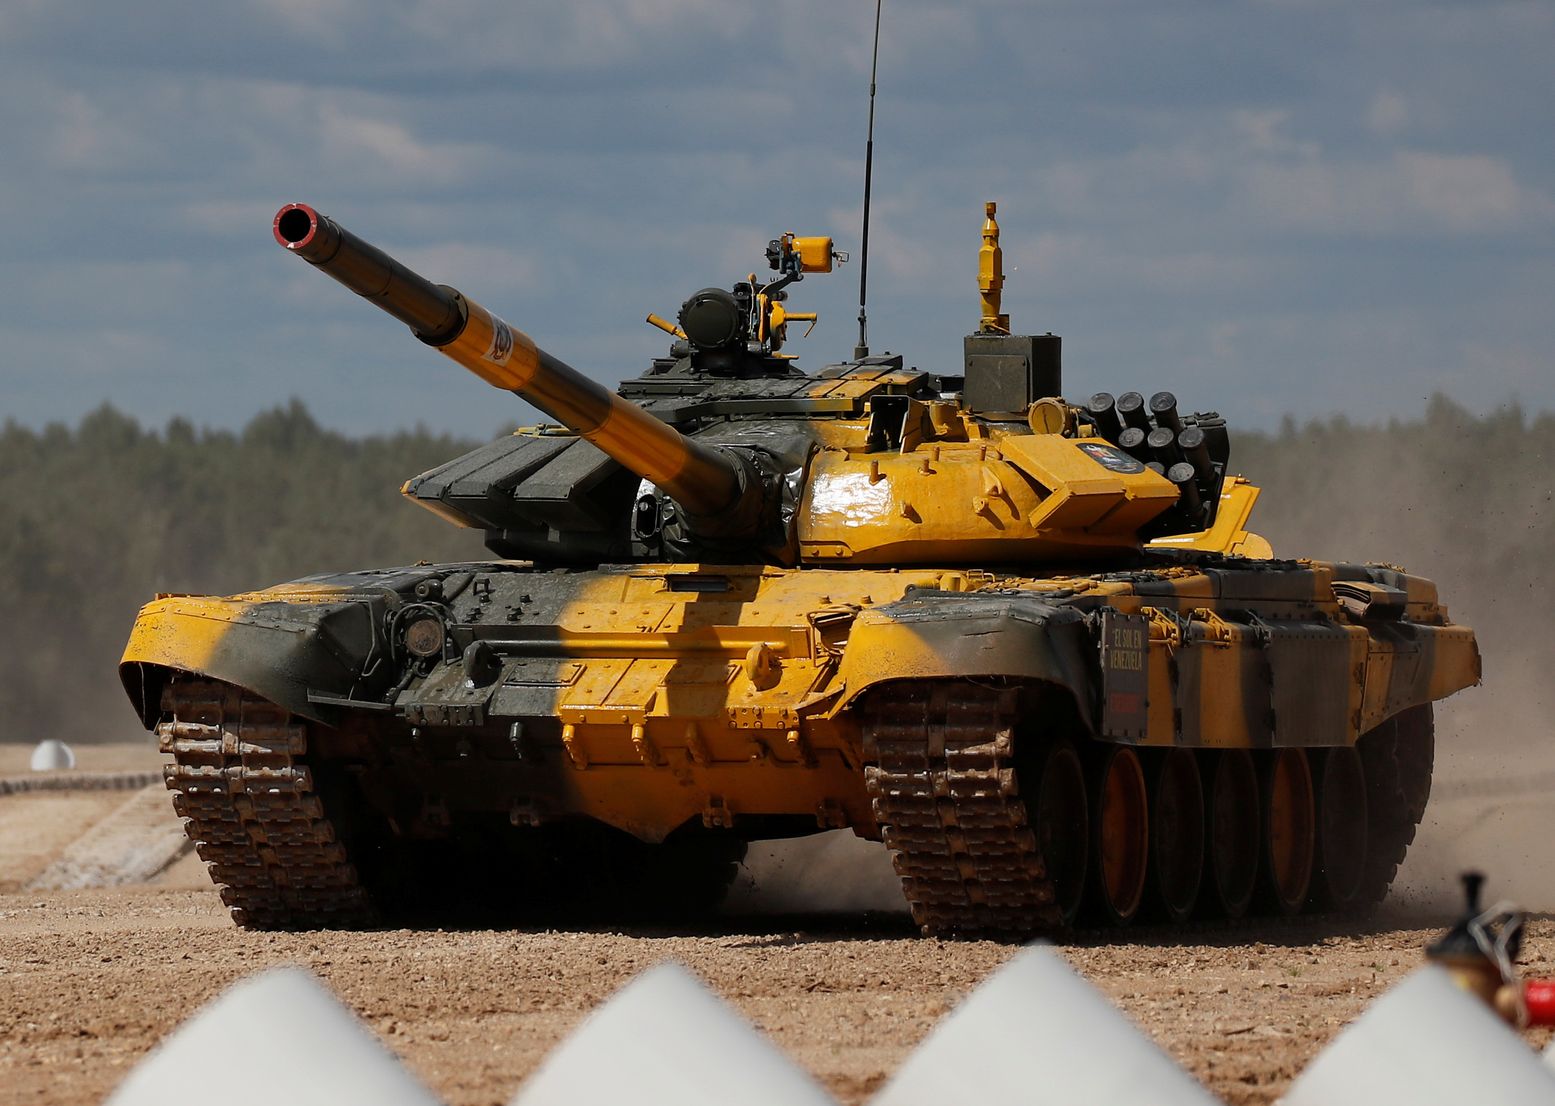 introducing-russia-s-new-t-72-tank-thanks-to-some-deadly-upgrades